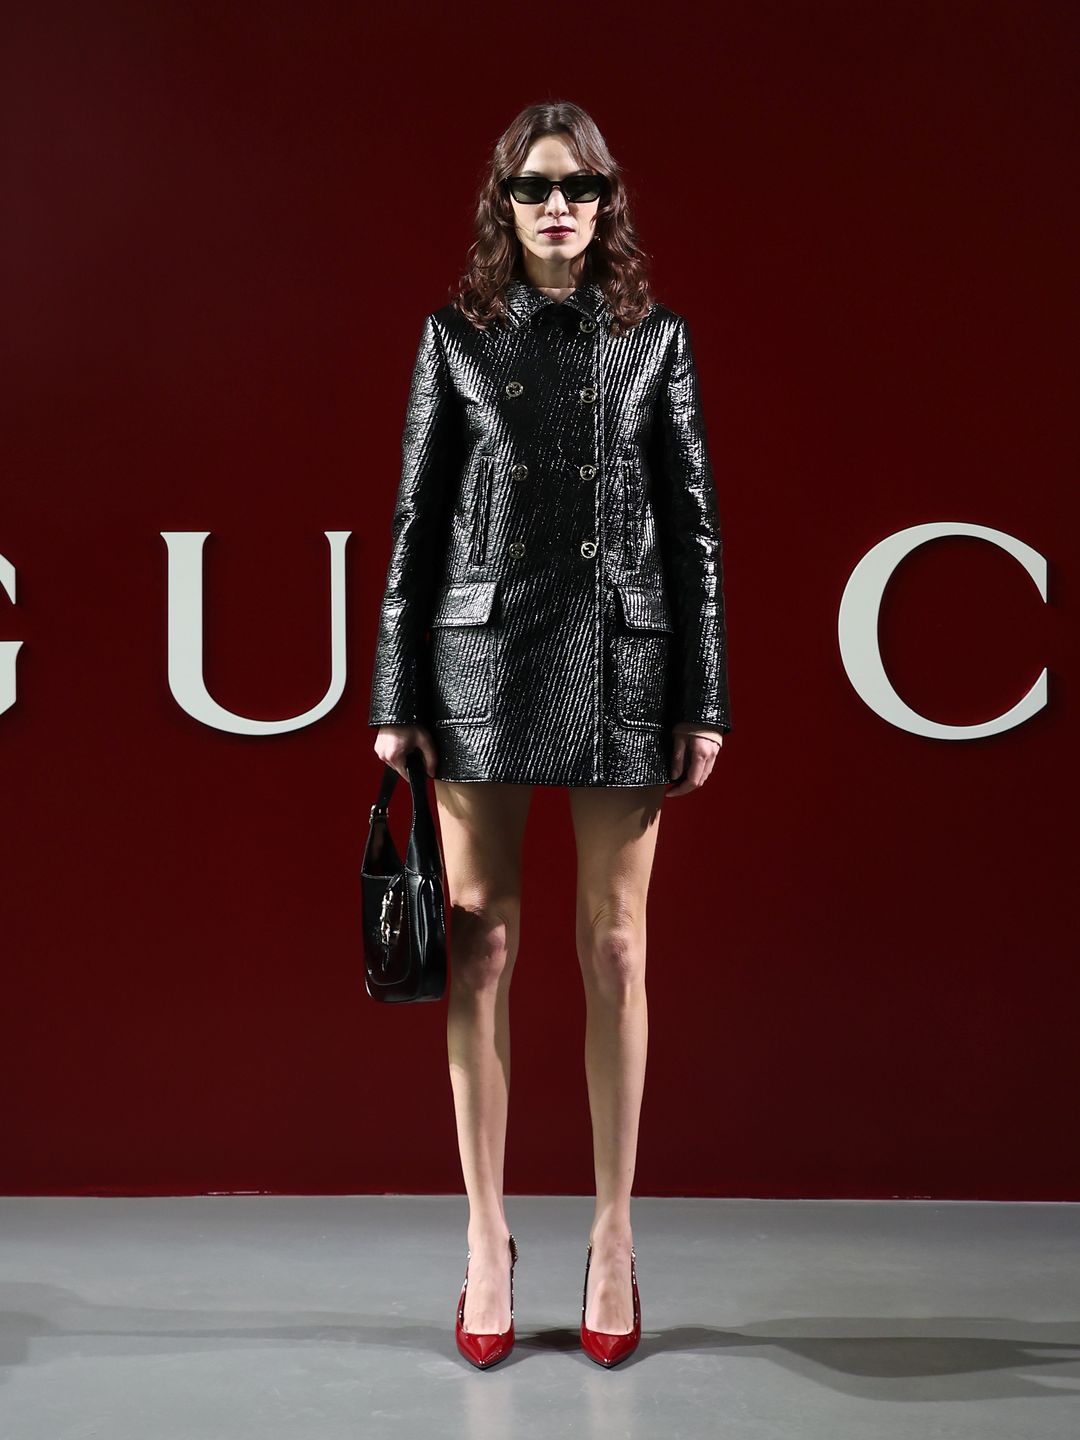 Alexa Chung wore a certified cool-girl ensemble to the Gucci show. Pairing a black patent coat mini dress with red heels and a Gucci Jackie bag.